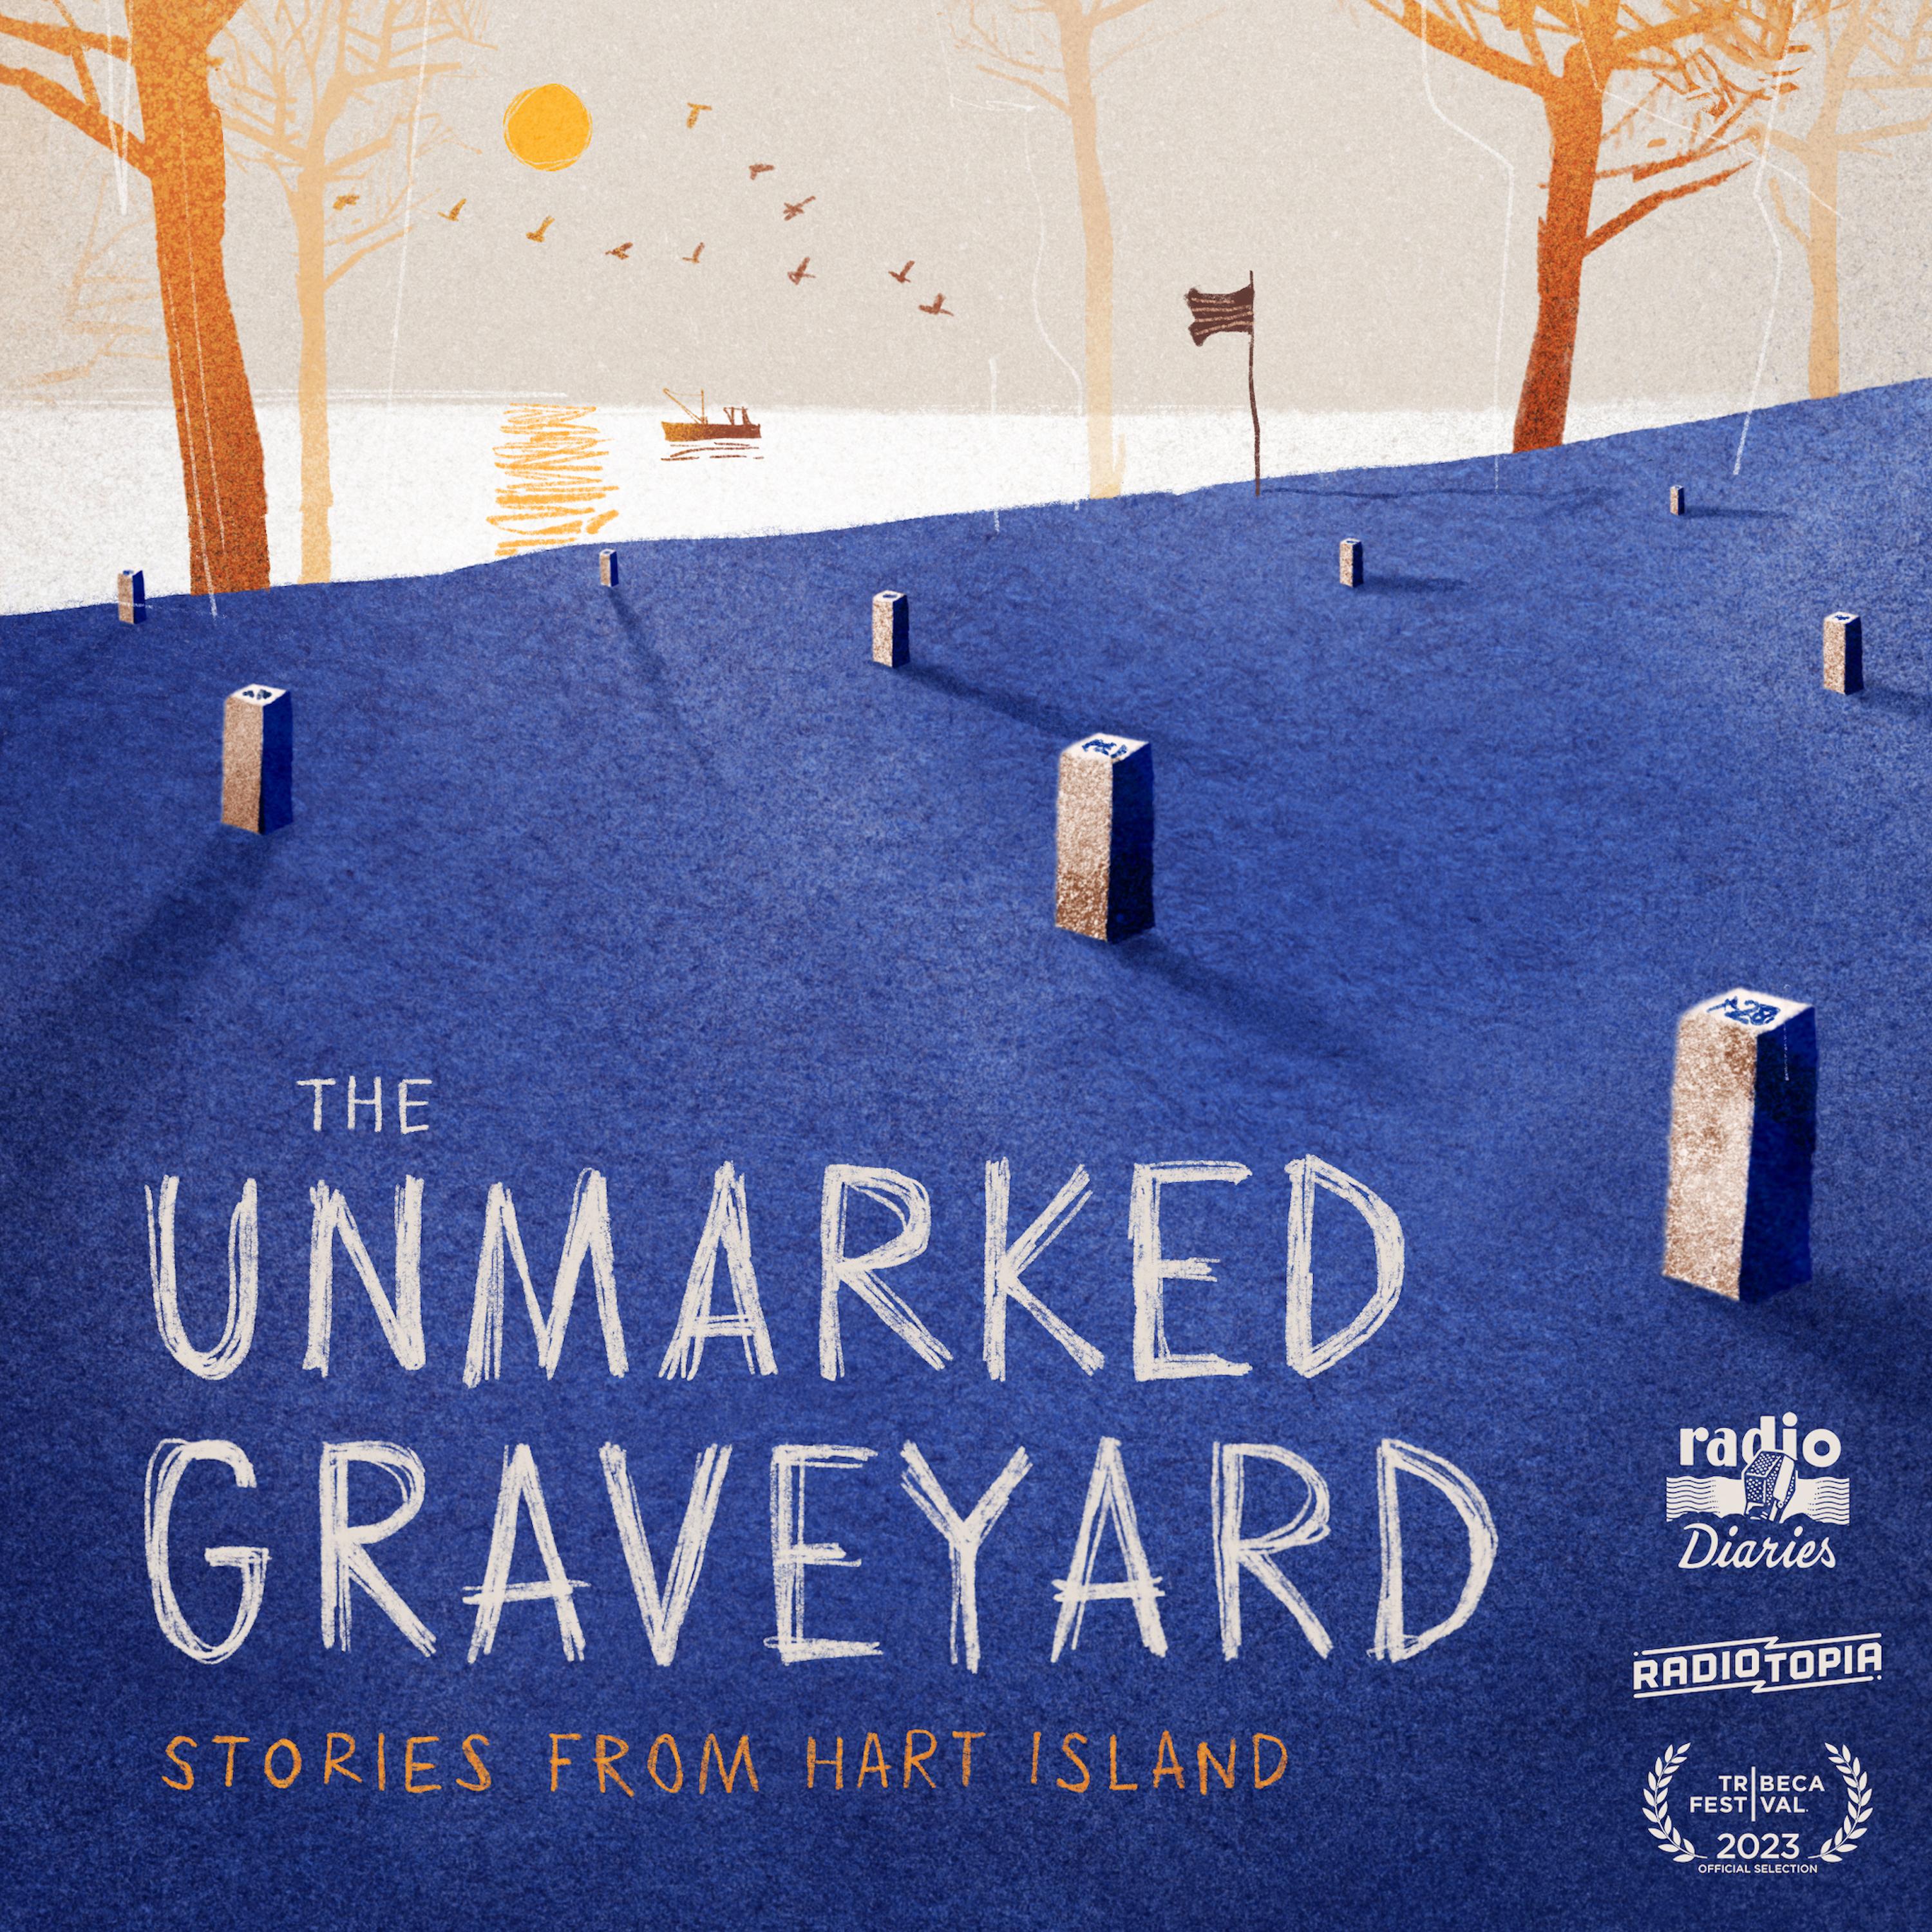 Thumbnail for "HOUR SPECIAL: Stories from the Unmarked Graveyard".